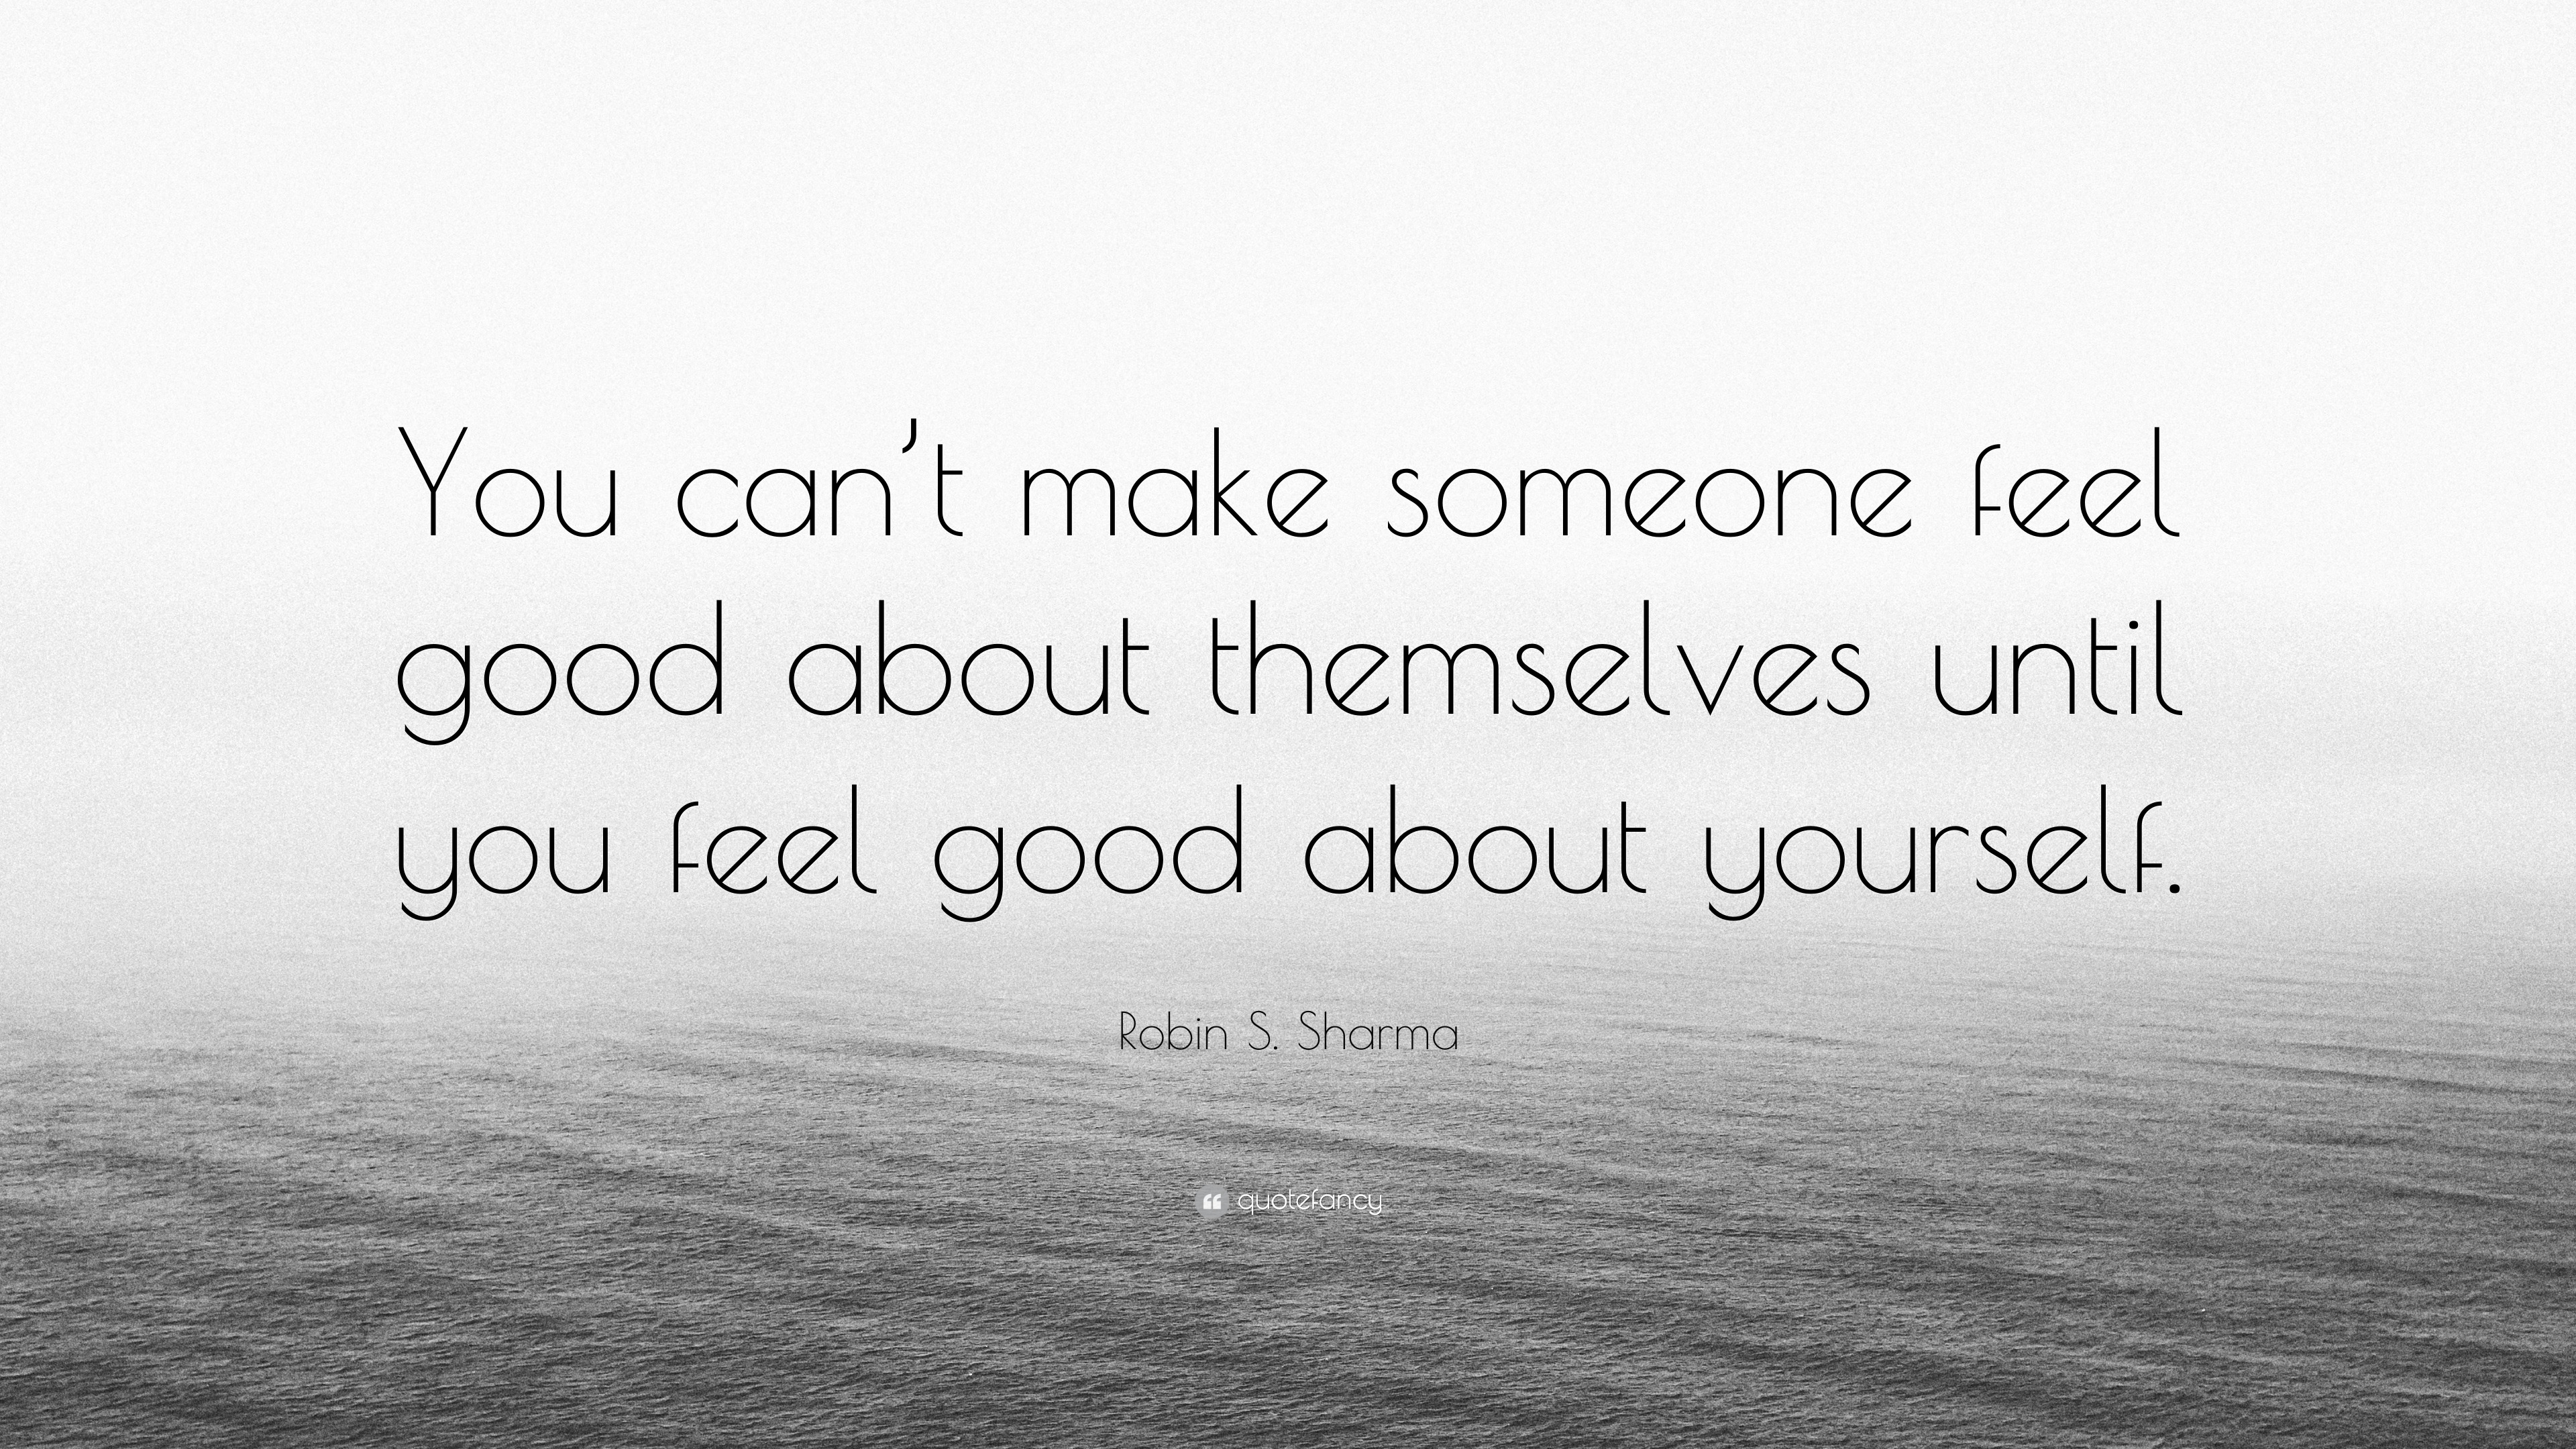 Robin S. Sharma Quote: “You can’t make someone feel good ...